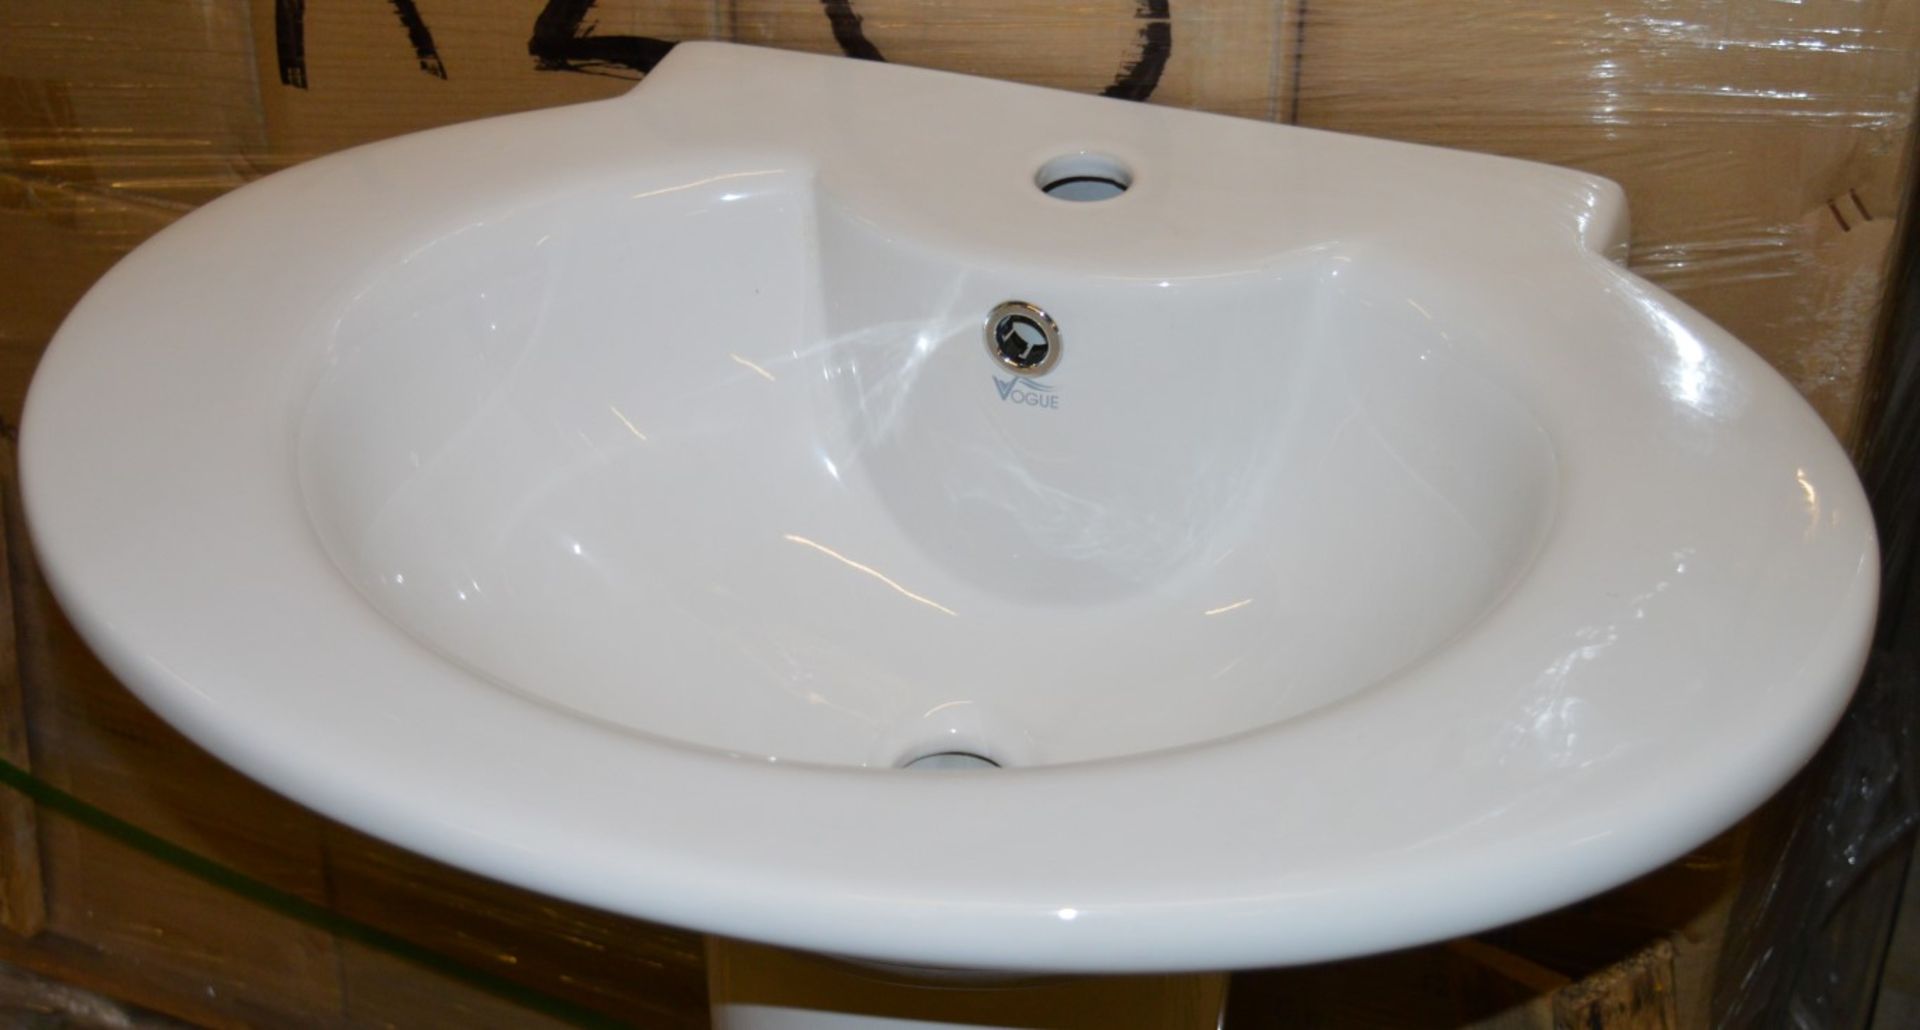 10 x Vogue Bathrooms AVLO Single Tap Hole Sink Basin With Pedestal - 630mm Width - Brand New Boxed - Image 2 of 2